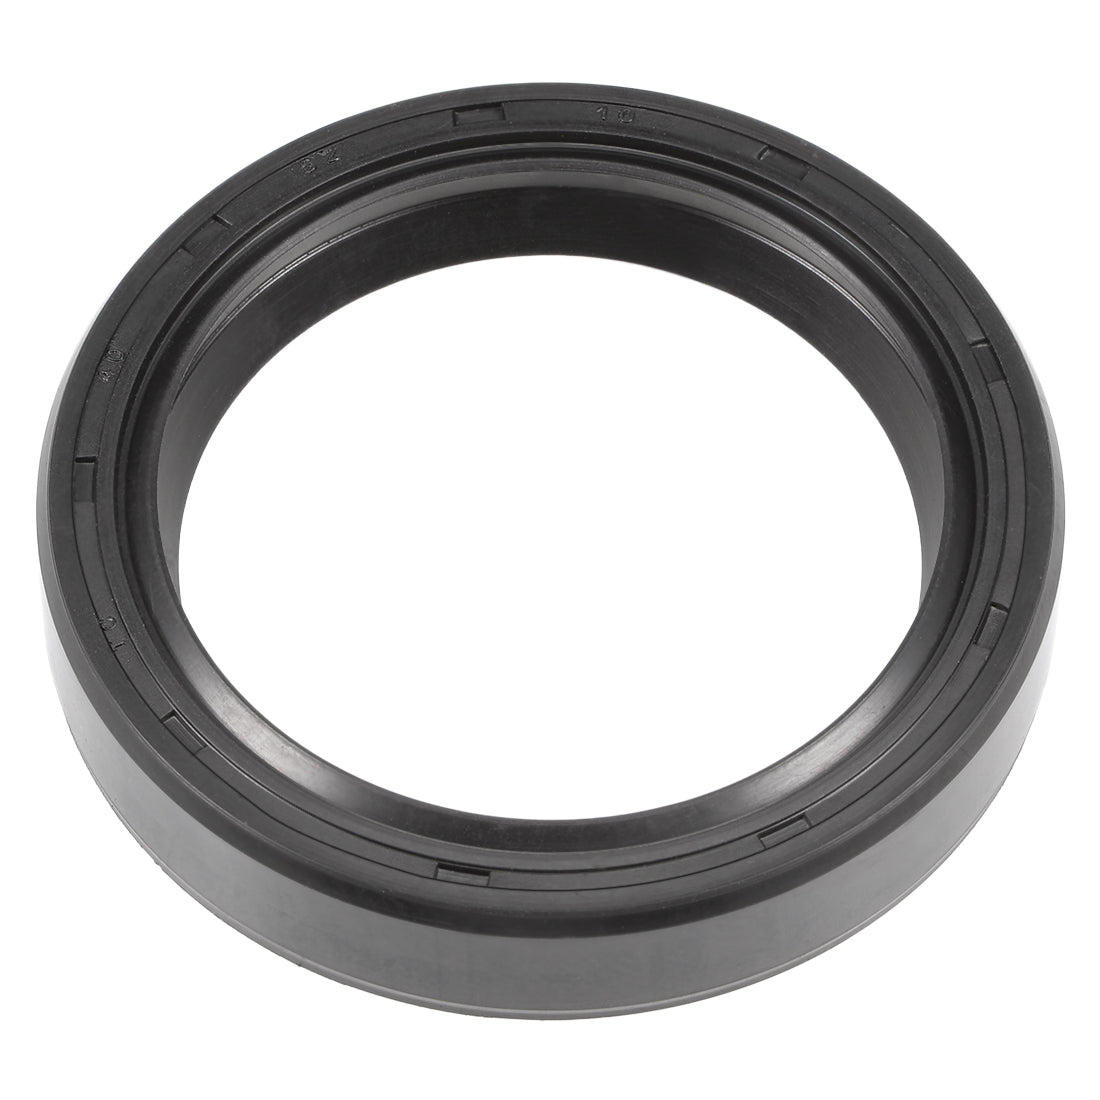 uxcell Uxcell Oil Seal, TC 40mm x 52mm x 10mm, Nitrile Rubber Cover Double Lip